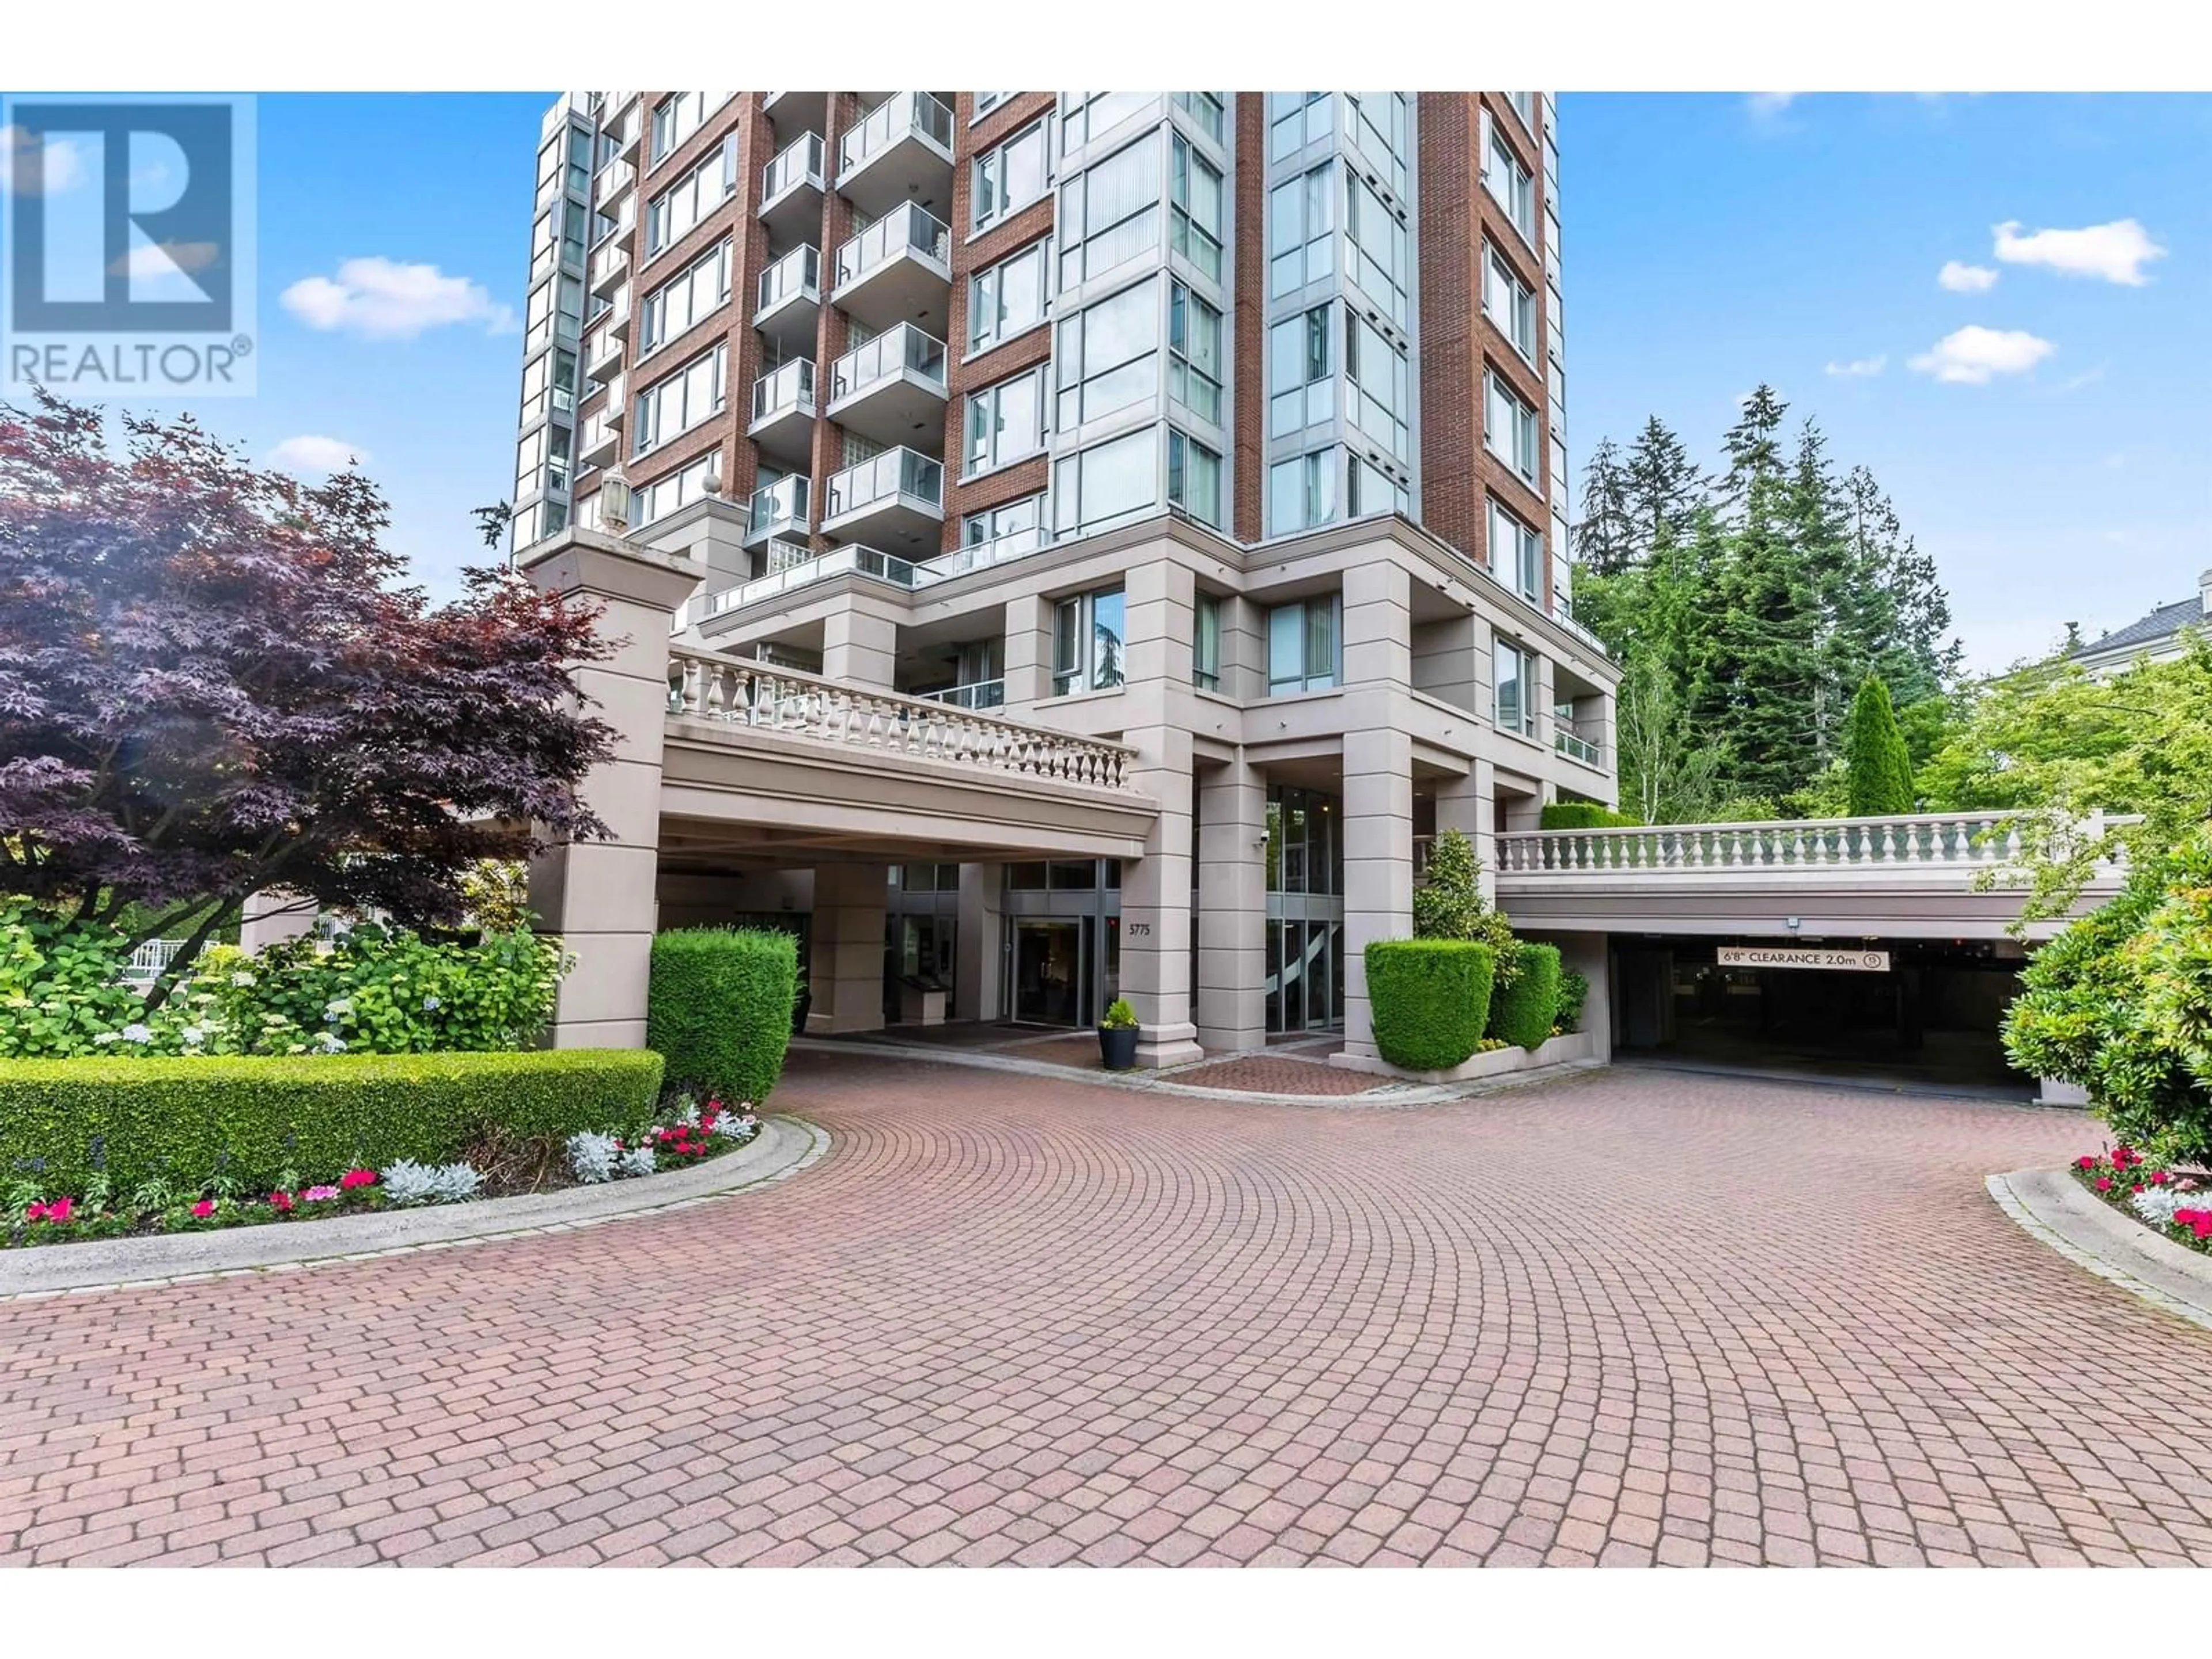 A pic from exterior of the house or condo for 1002 5775 HAMPTON PLACE, Vancouver British Columbia V6T2G6